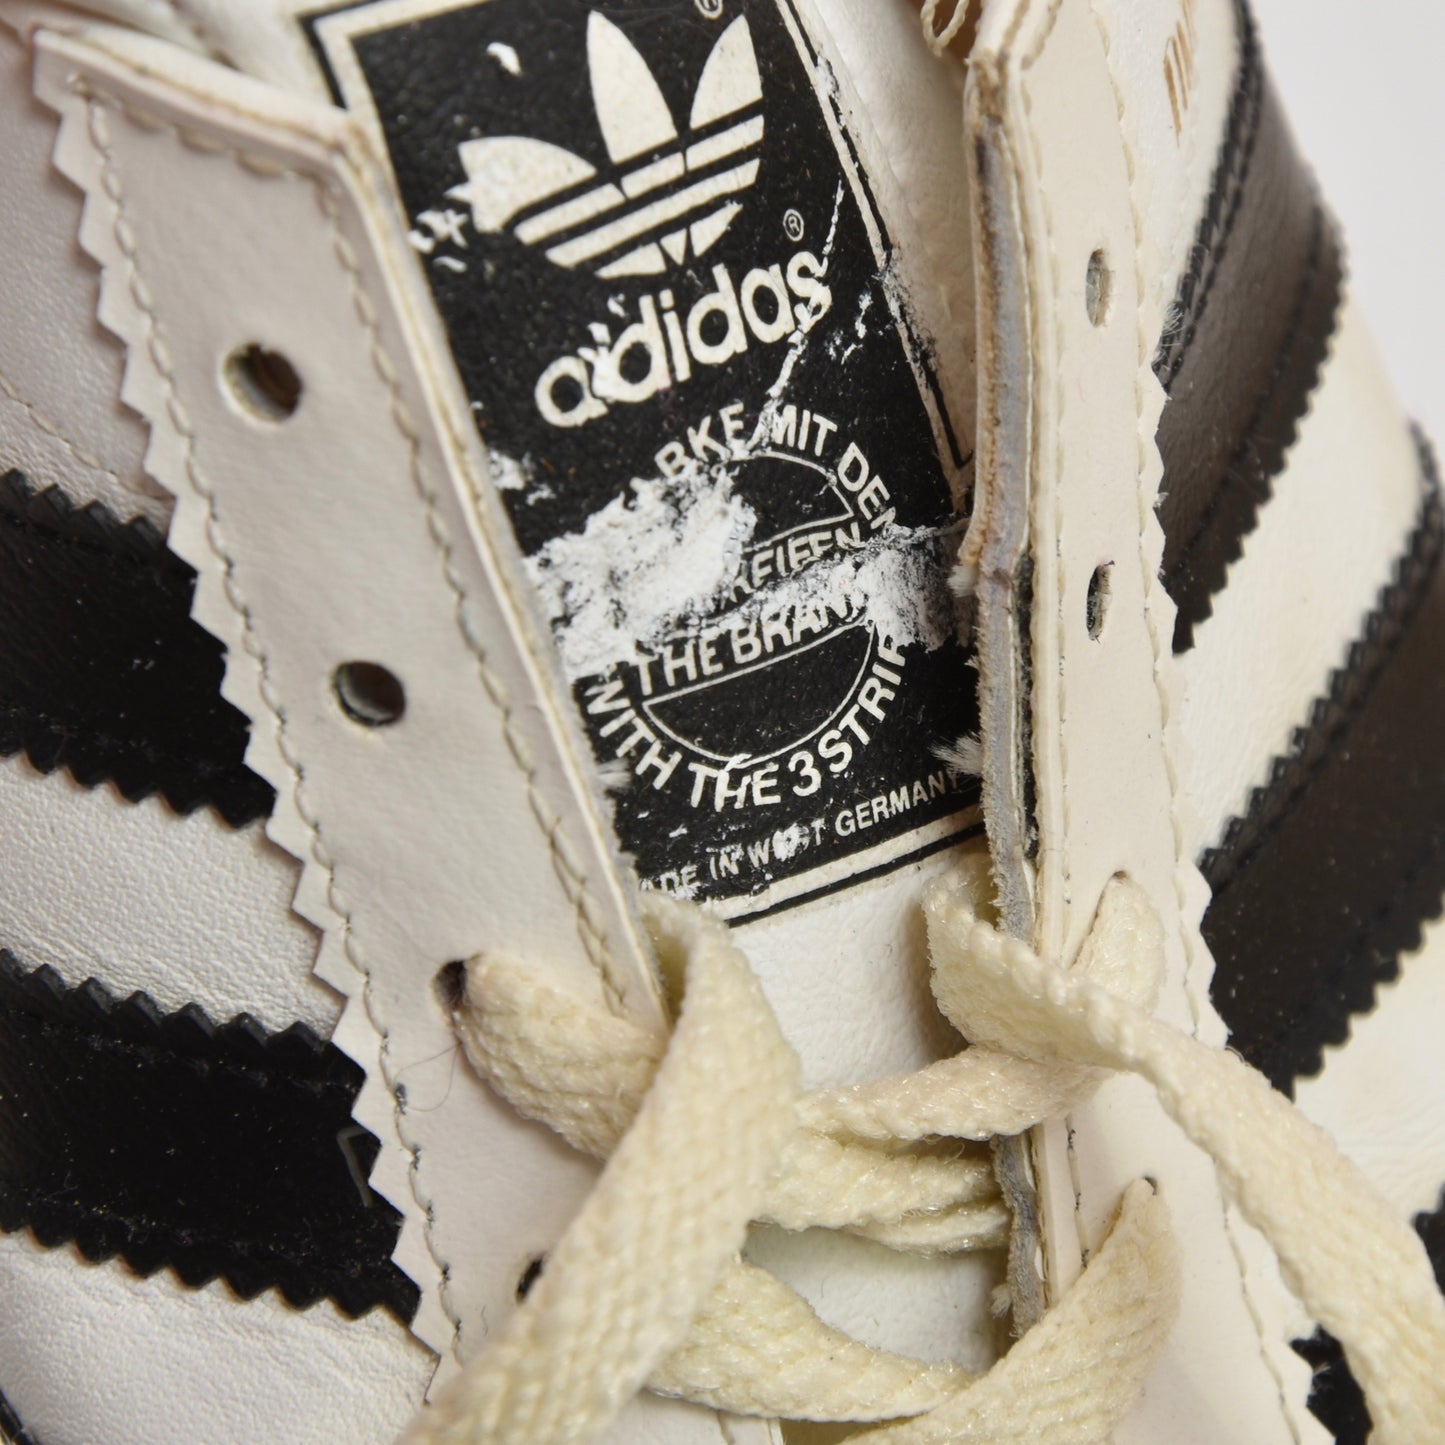 Vintage Adidas Universal Sneakers Made in West Germany Size 6.5 - White/Black